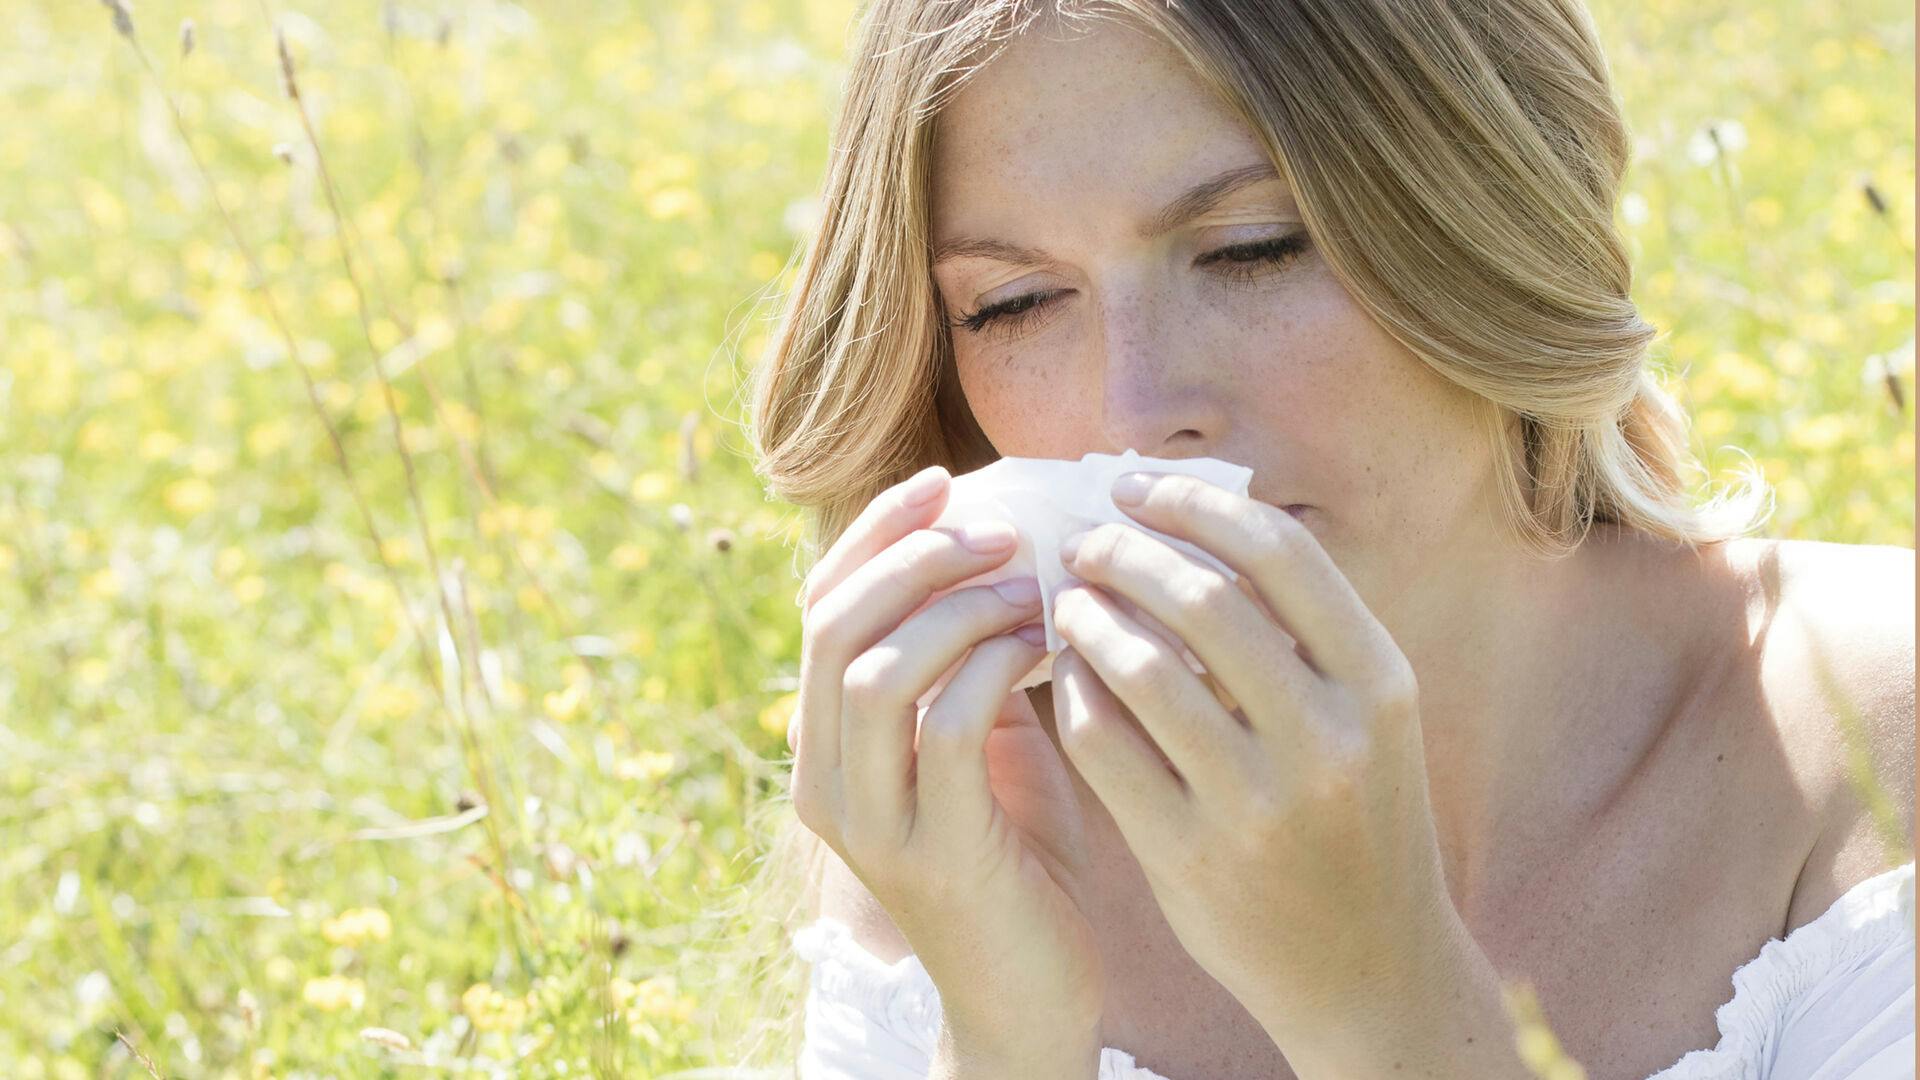 MODEL RELEASED. Young woman blowing nose on tissue. Keywords: one person, young women, women, 20s, 20-24 years, portrait, blowing nose, tissue, common cold, summer, hay fever, allergy, allergies, plants, female, illness, abnormal, unwell, healthcare, medicine, twenties, medical